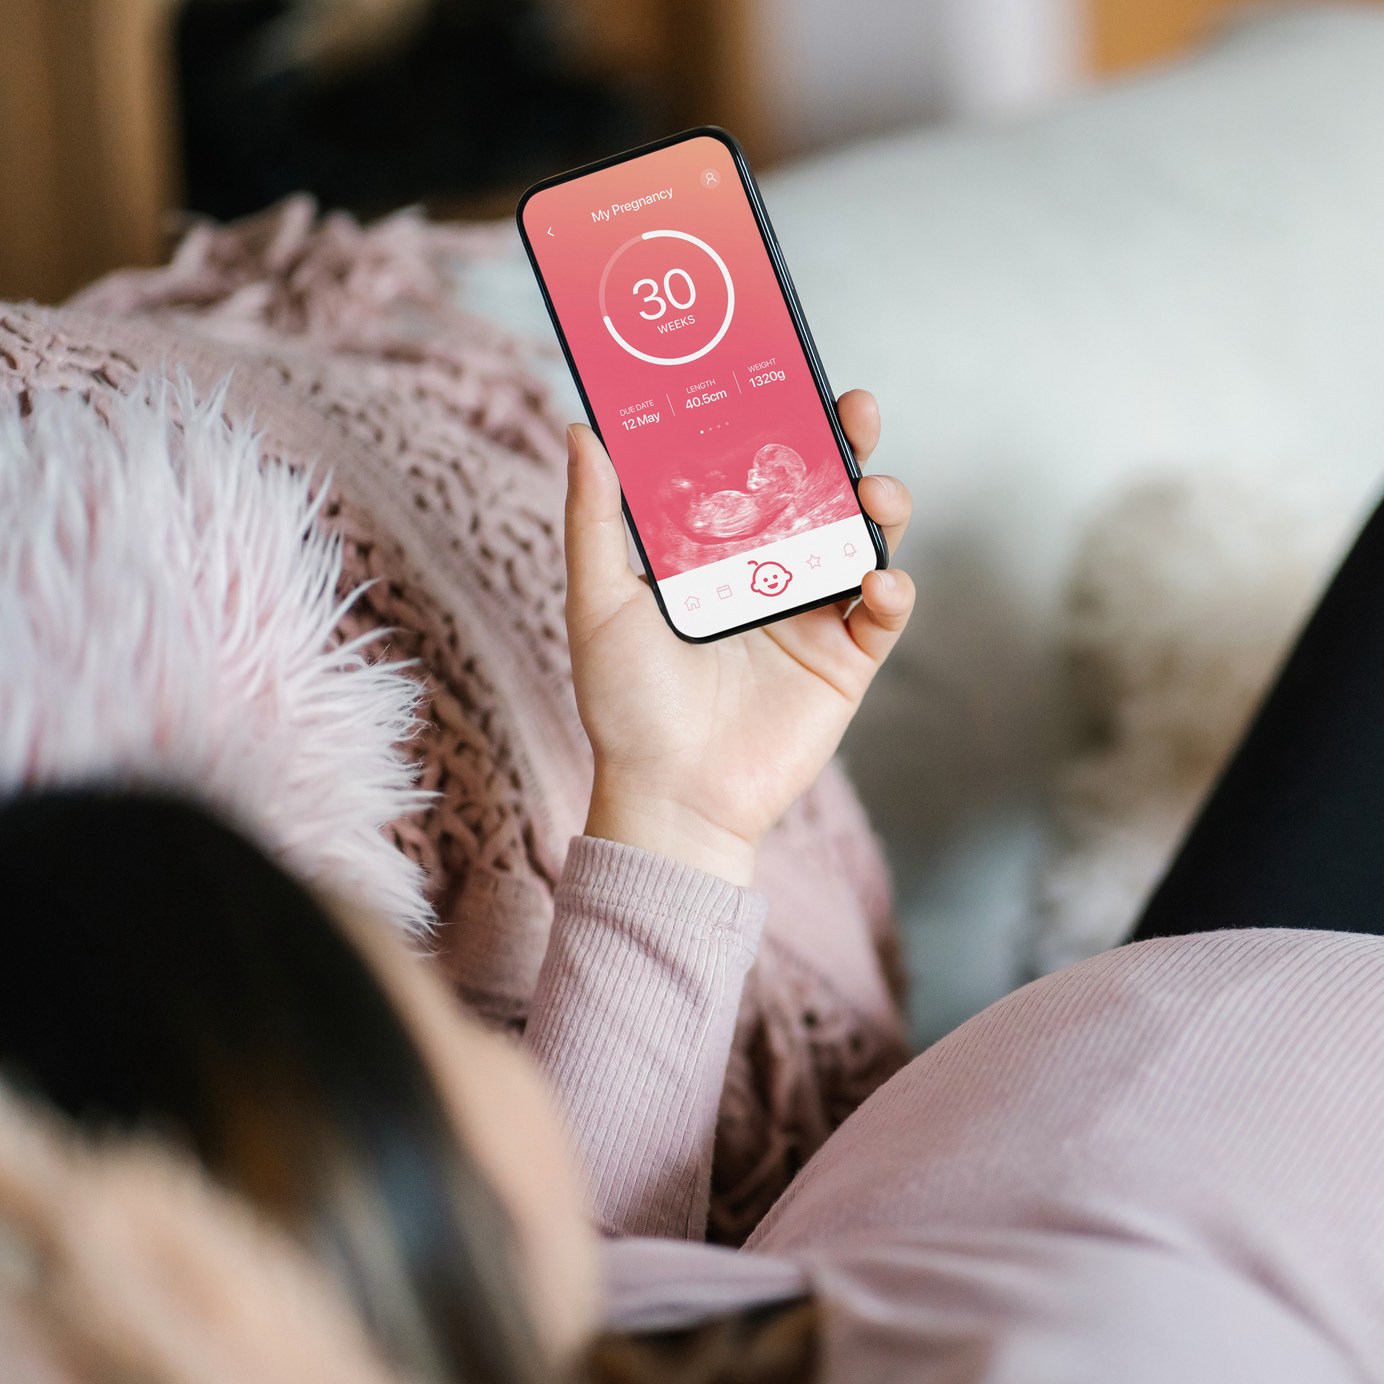 Young Asian pregnant woman lying on sofa in the living room at cozy home, using baby tracker app on smartphone to monitor her baby's growth and development throughout the pregnancy journey. Technology and pregnancy lifestyle